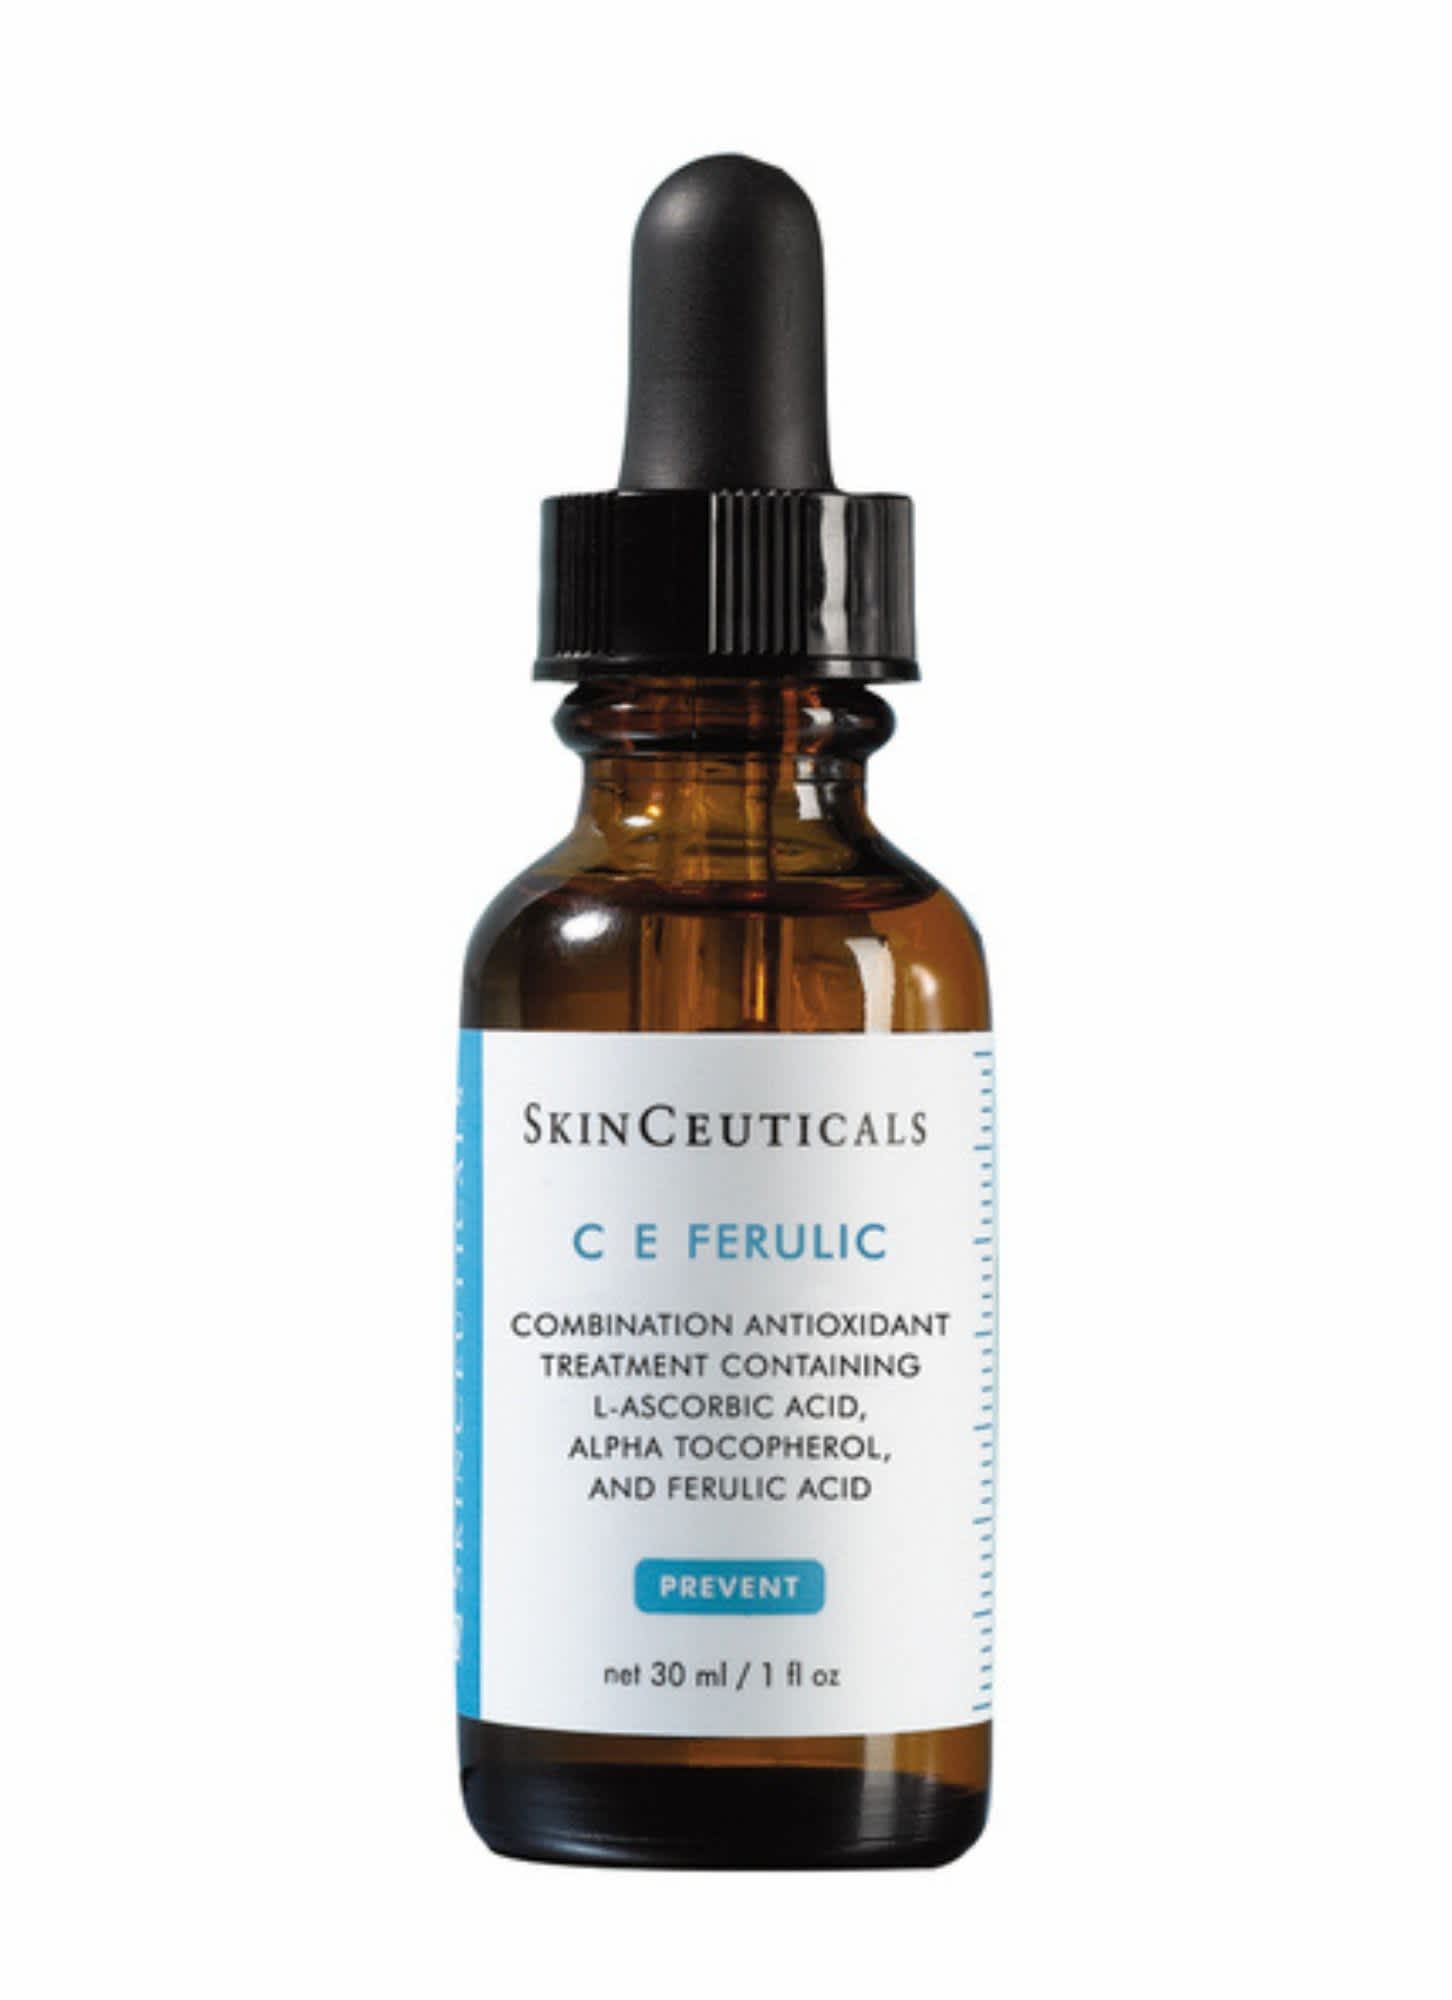 Skinceuticals, C E Ferulic Serum, ($233) currently on 20% discount at Adore Beauty